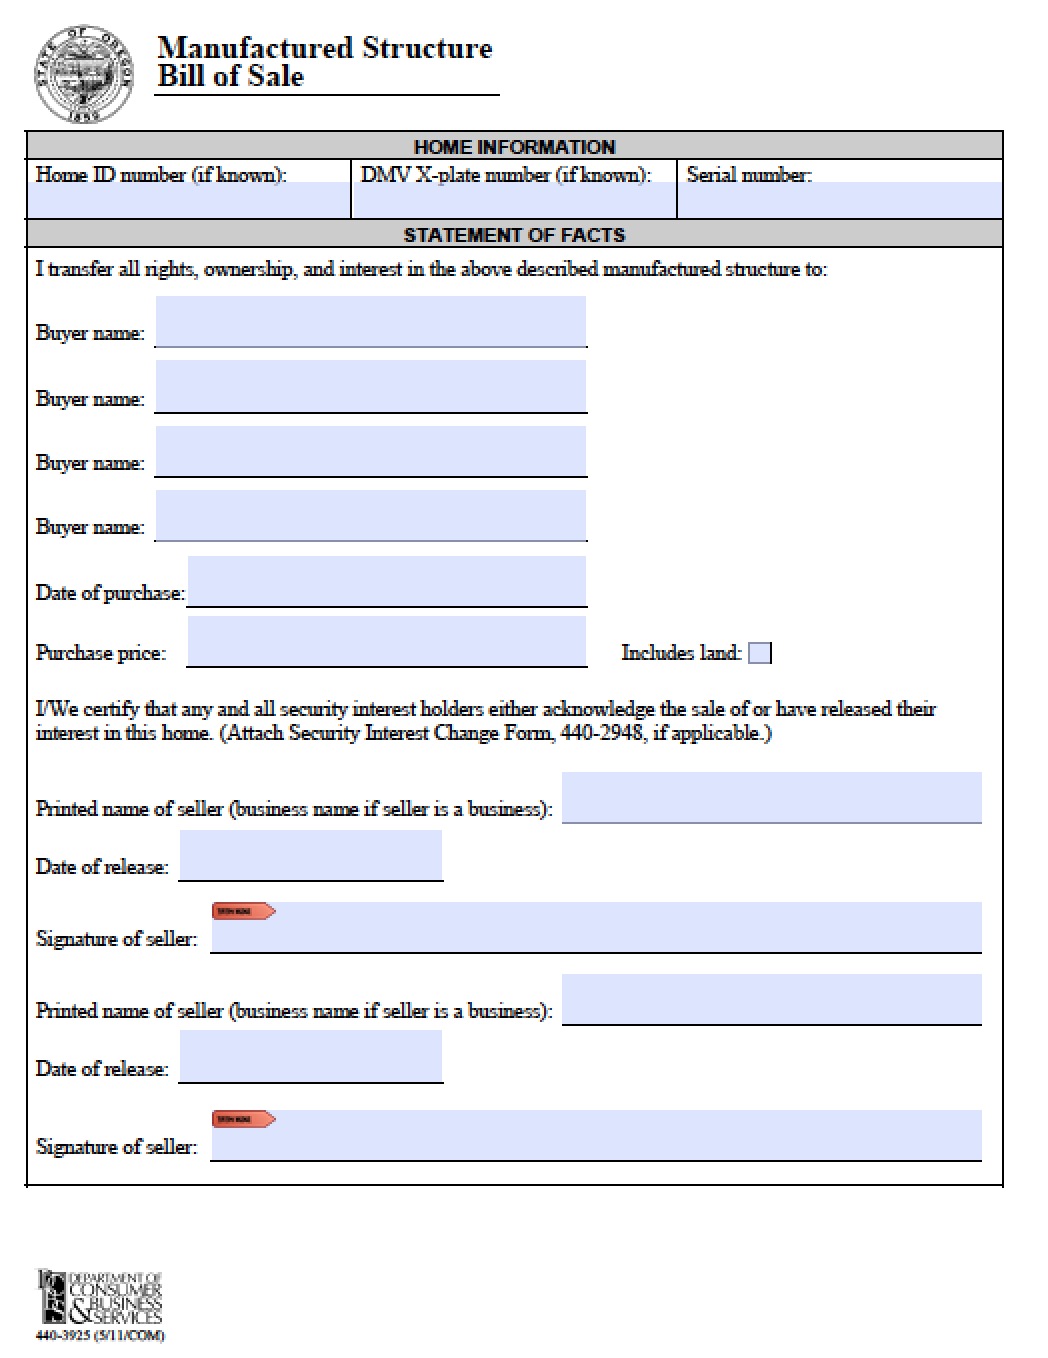 free-oregon-manufactured-home-bill-of-sale-3925-form-pdf-word-doc